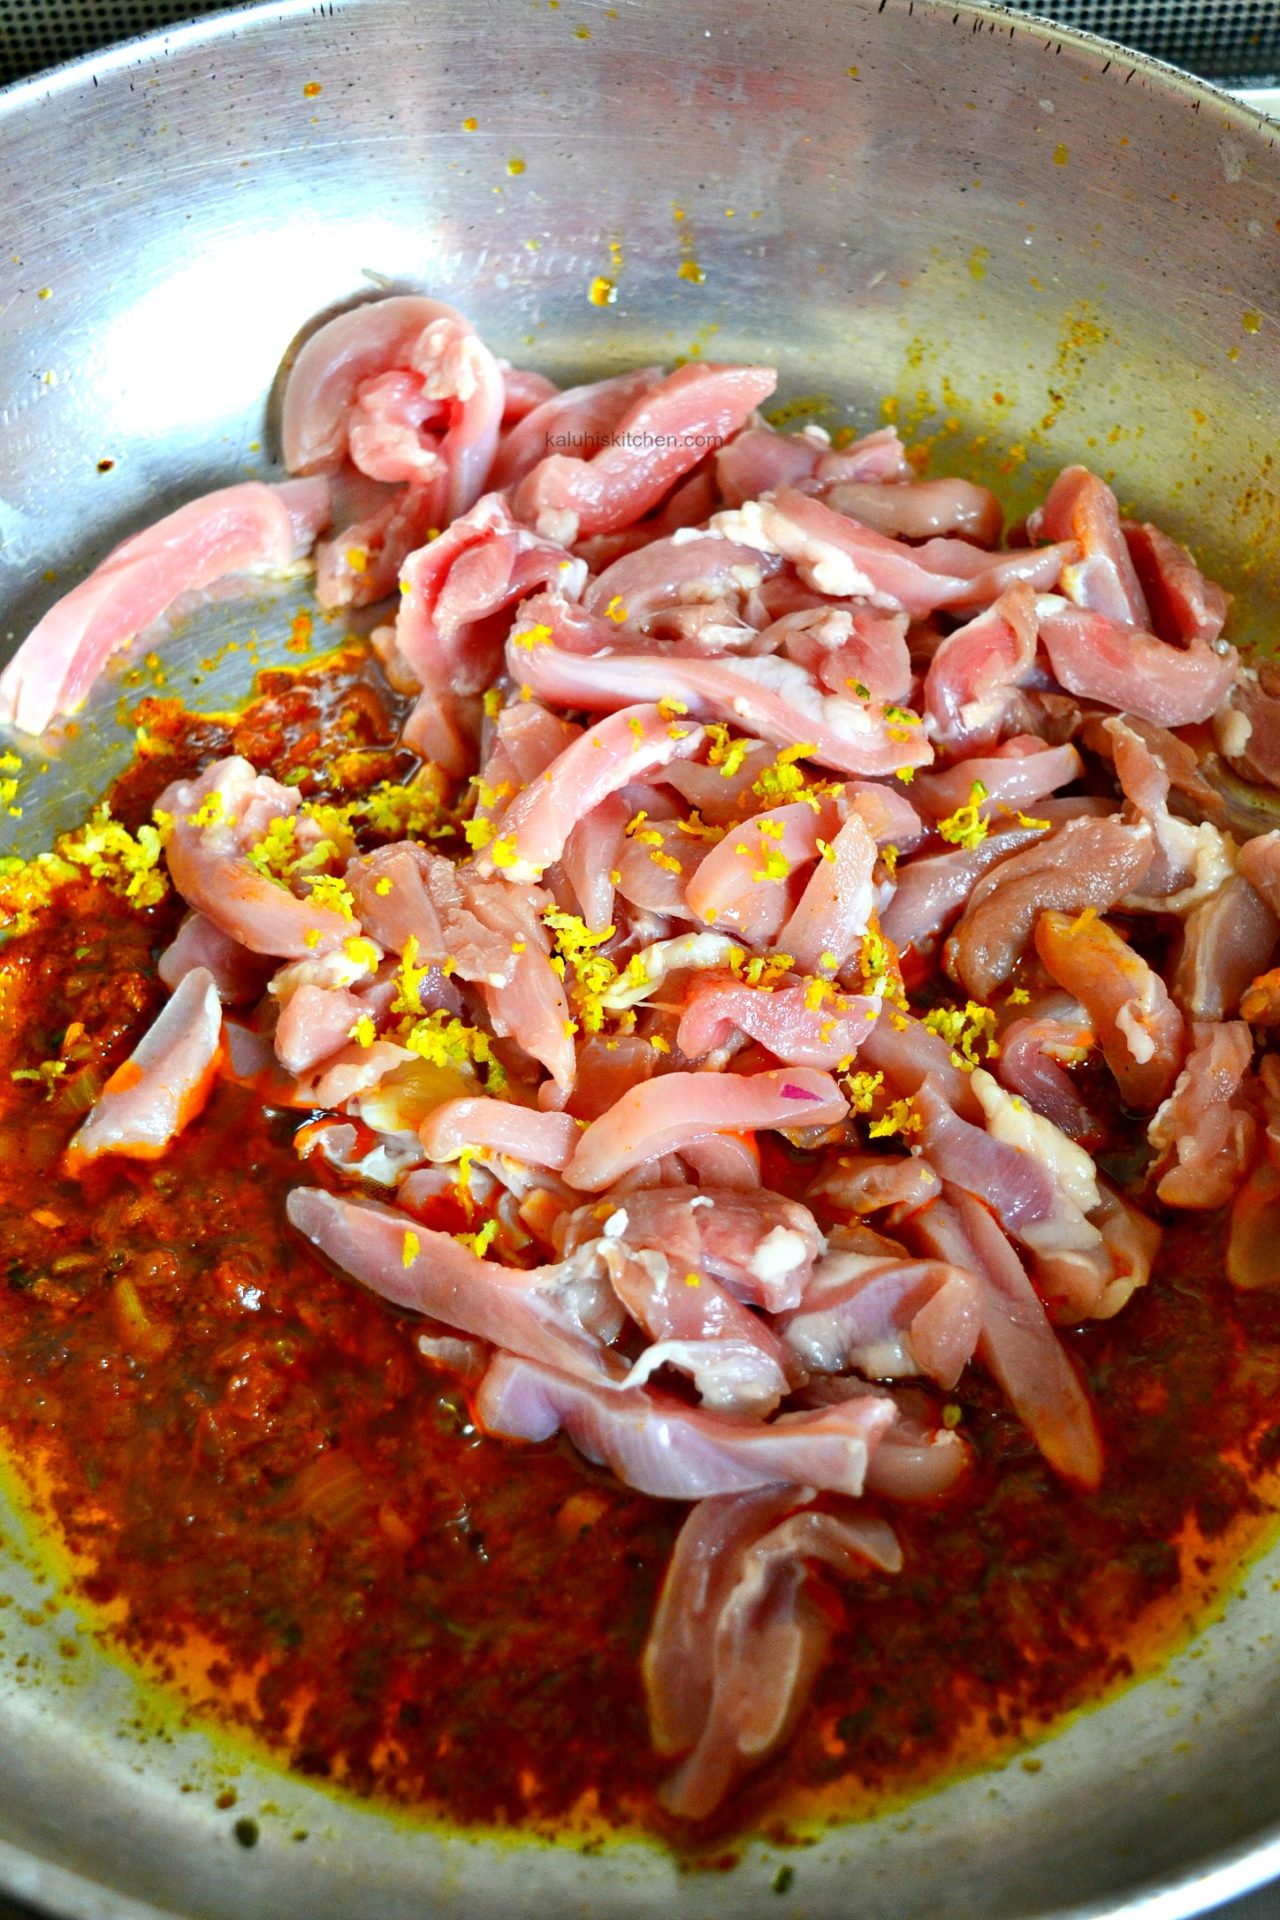 add the chicken strips together with the lemon zest, lemon juice and stir them on the sauce and let them cook down for 5-8 minutes-kaluhiskitchen.com